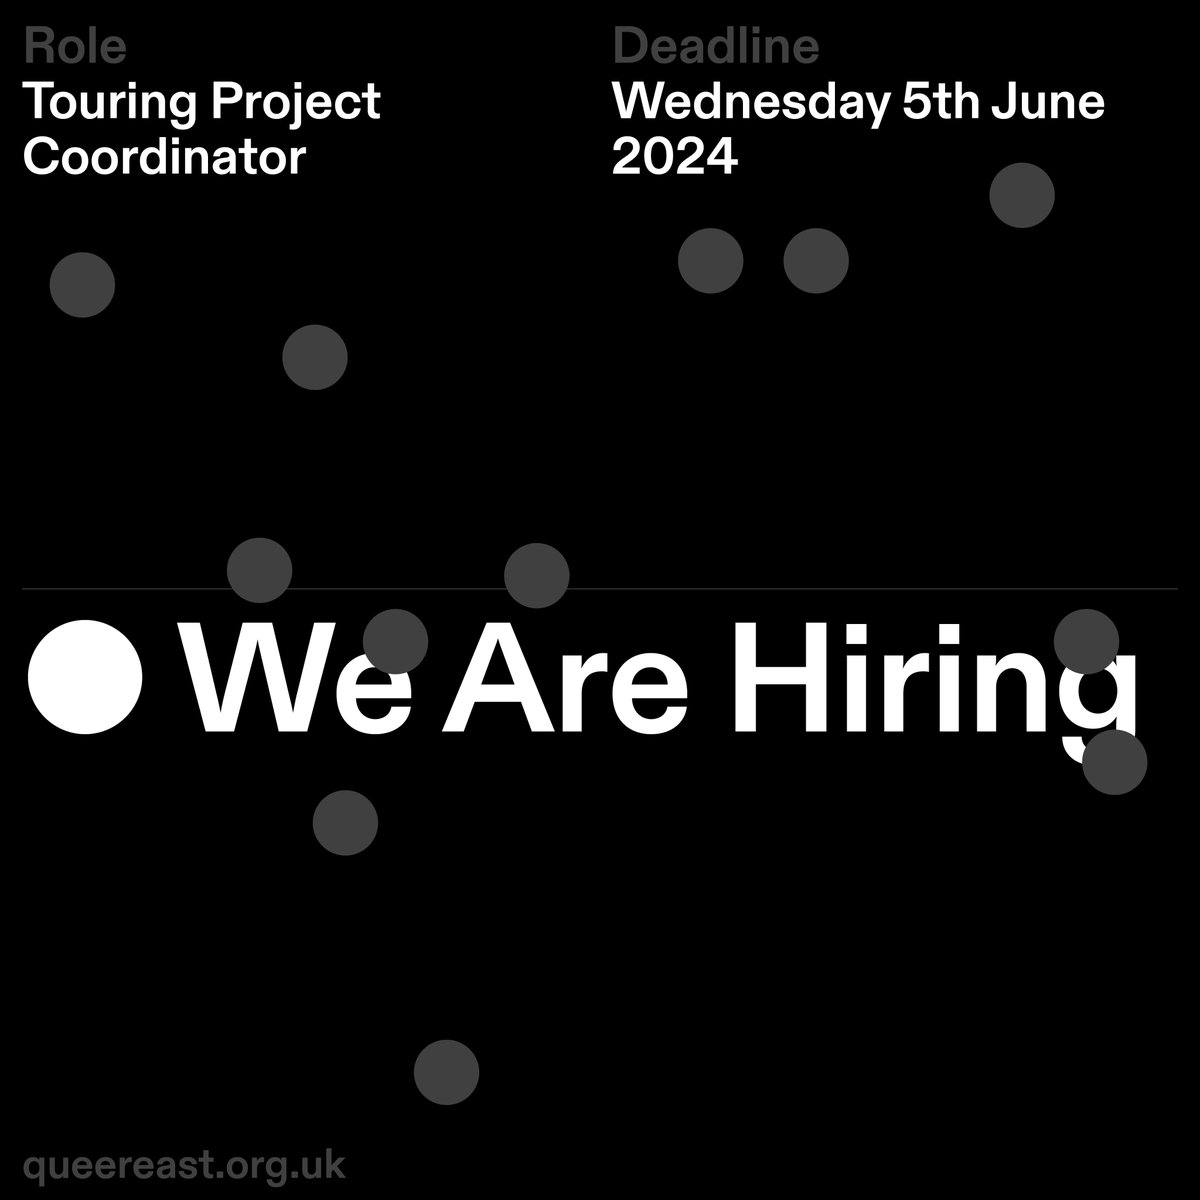 We're hiring! #QueerEast is seeking five touring project coordinators across the UK to support the delivery of its tour, On the Road, and community outreach work this autumn. Details and salary: queereast.org.uk/news/call-out-…